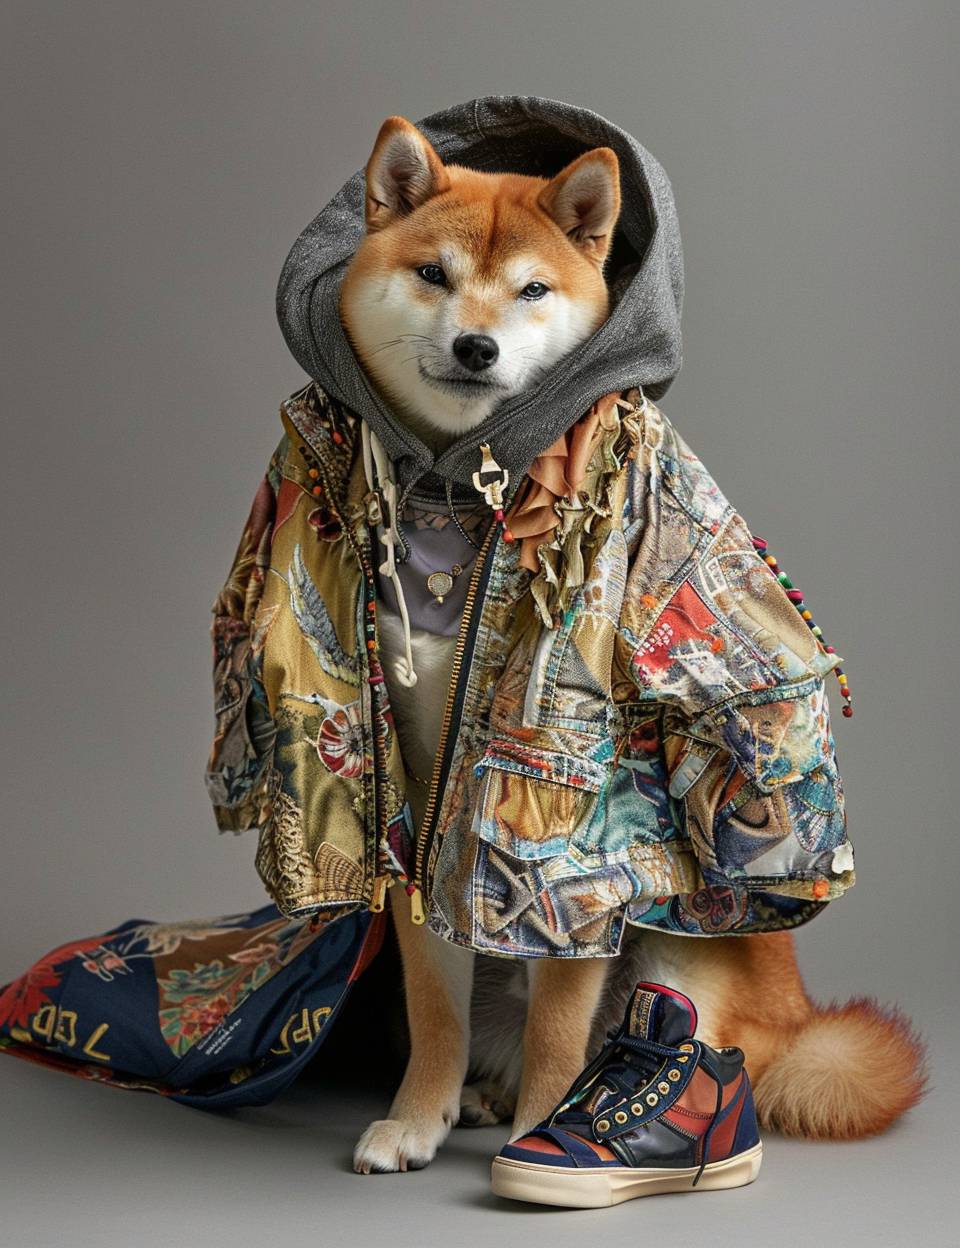 In the style of a fashion shoot, a photo of an anthropomorphic Shiba Inu dog wearing large hiphop clothes from the 1990s and sneakers, fantasy, insanely detailed and intricate, hypermaximalist, high fashion.